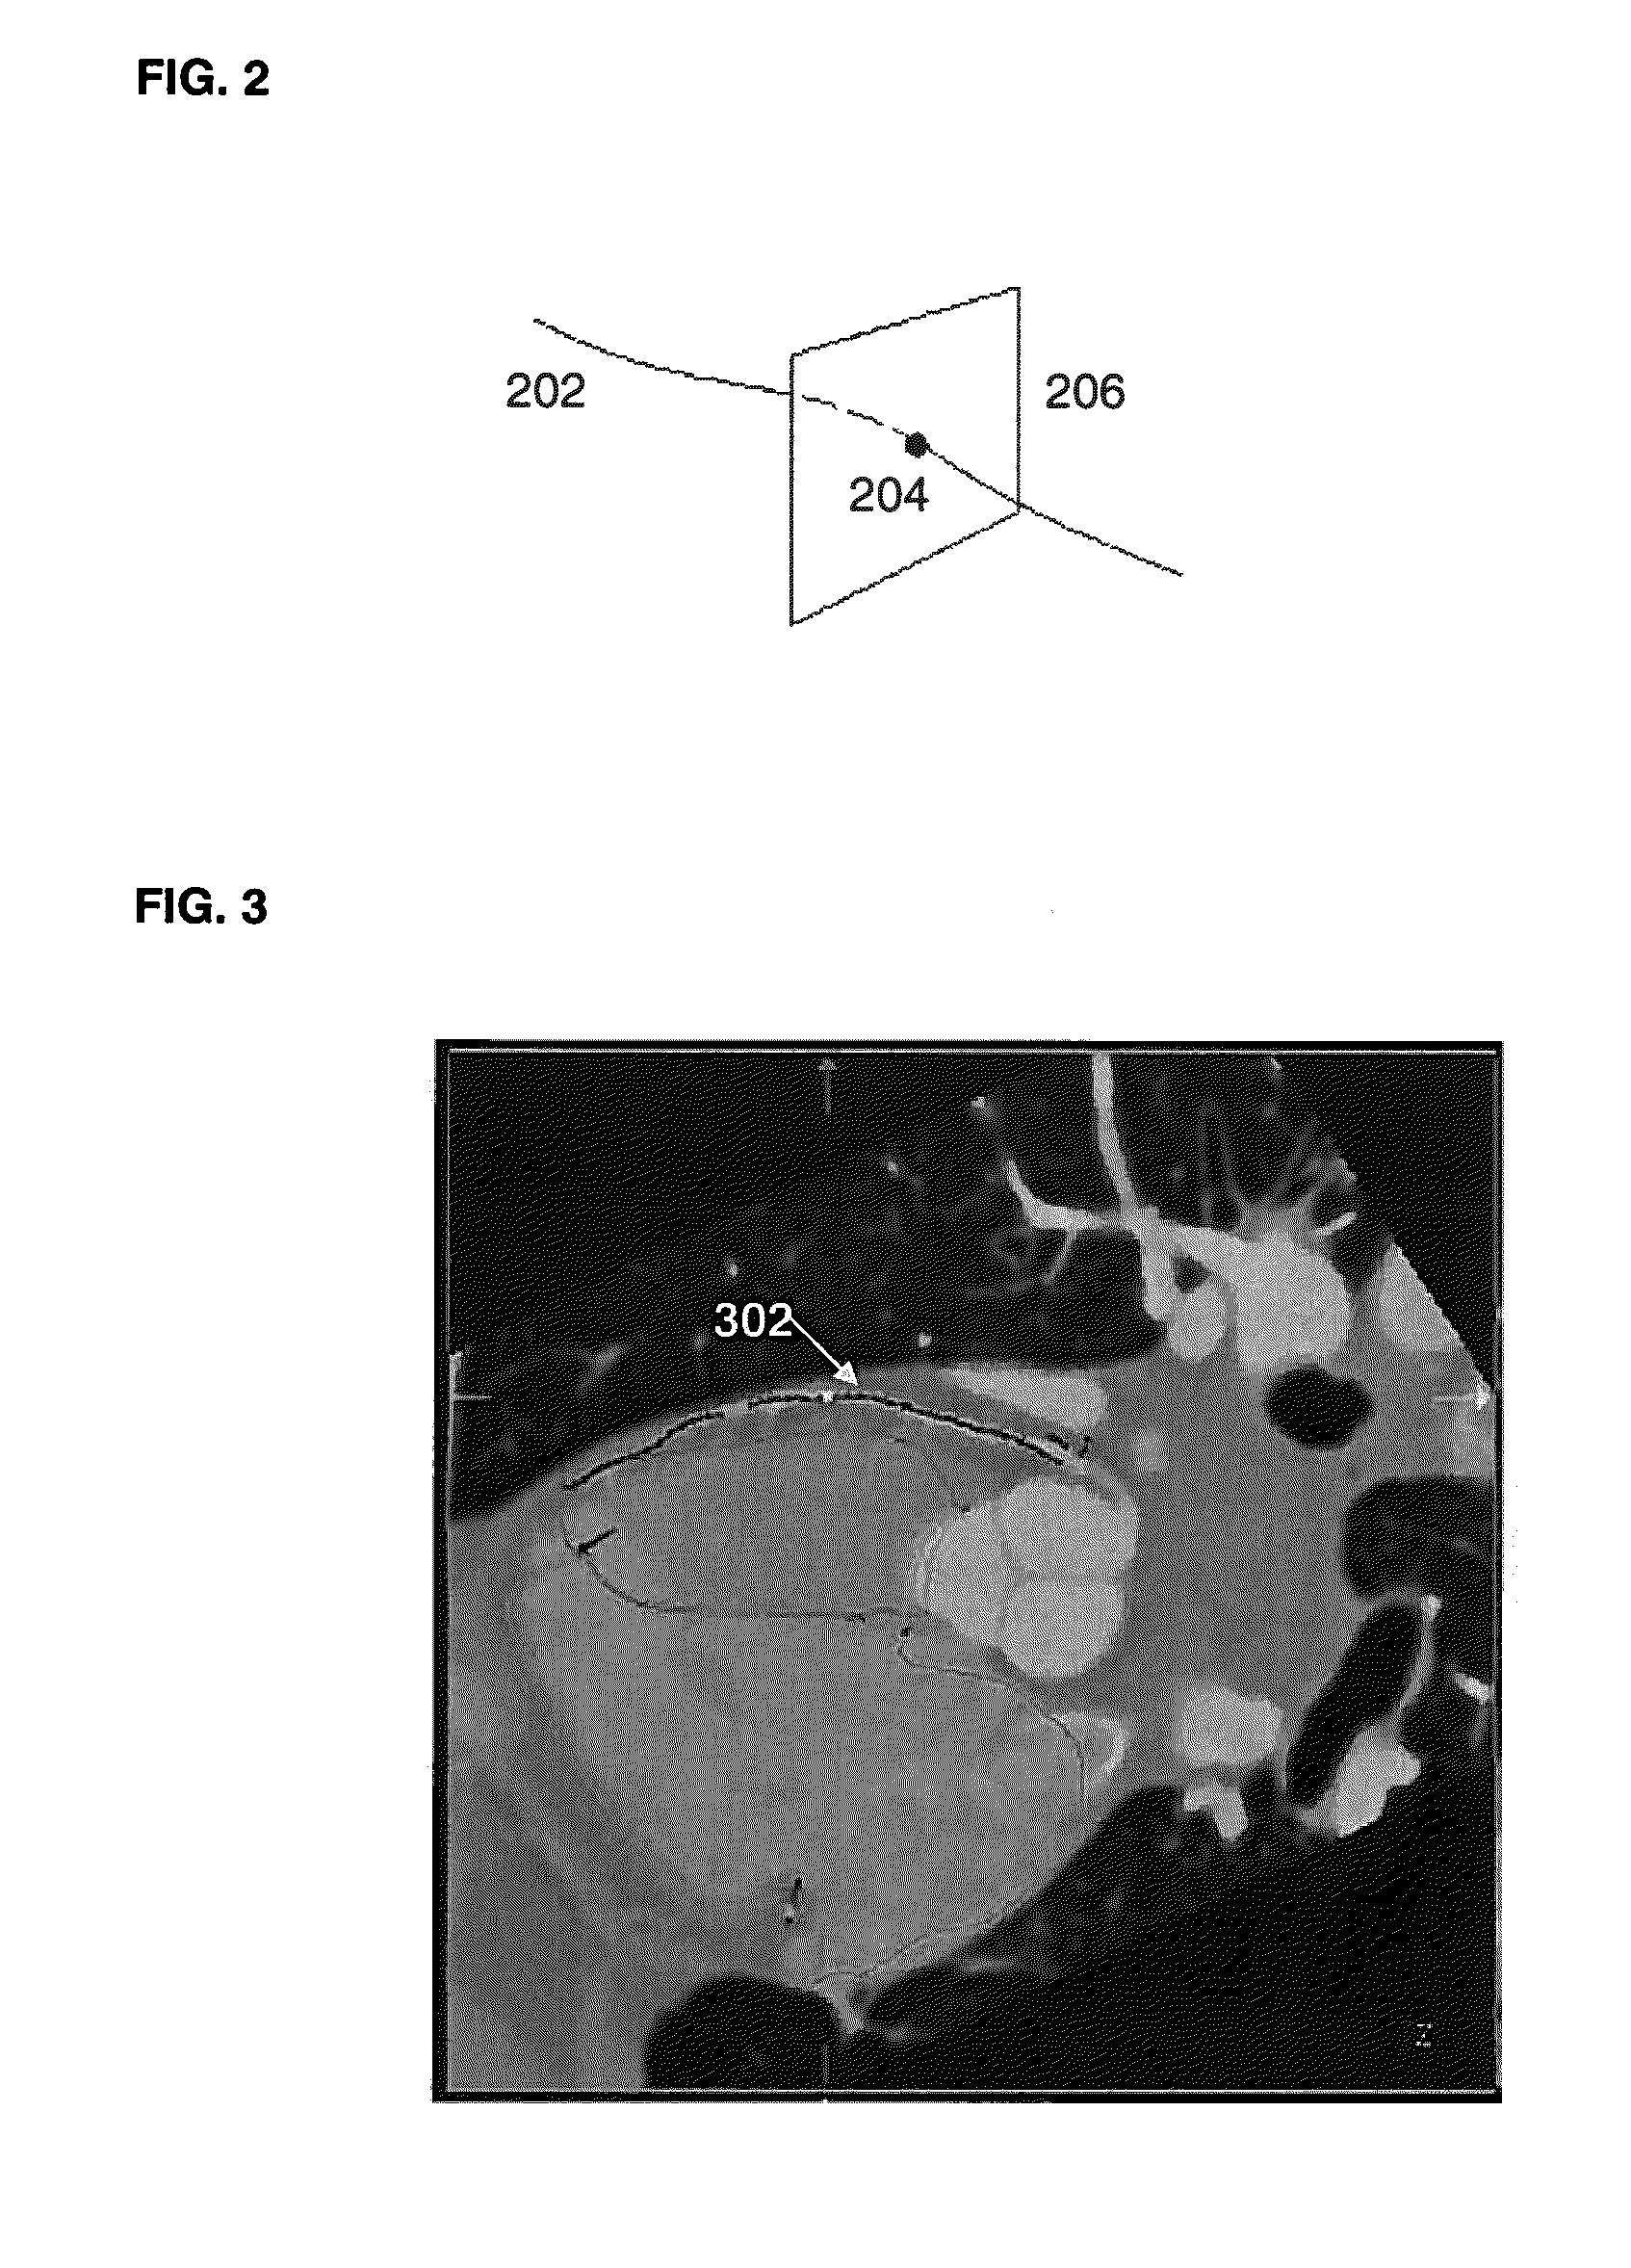 Method and System for Automatic Coronary Artery Detection